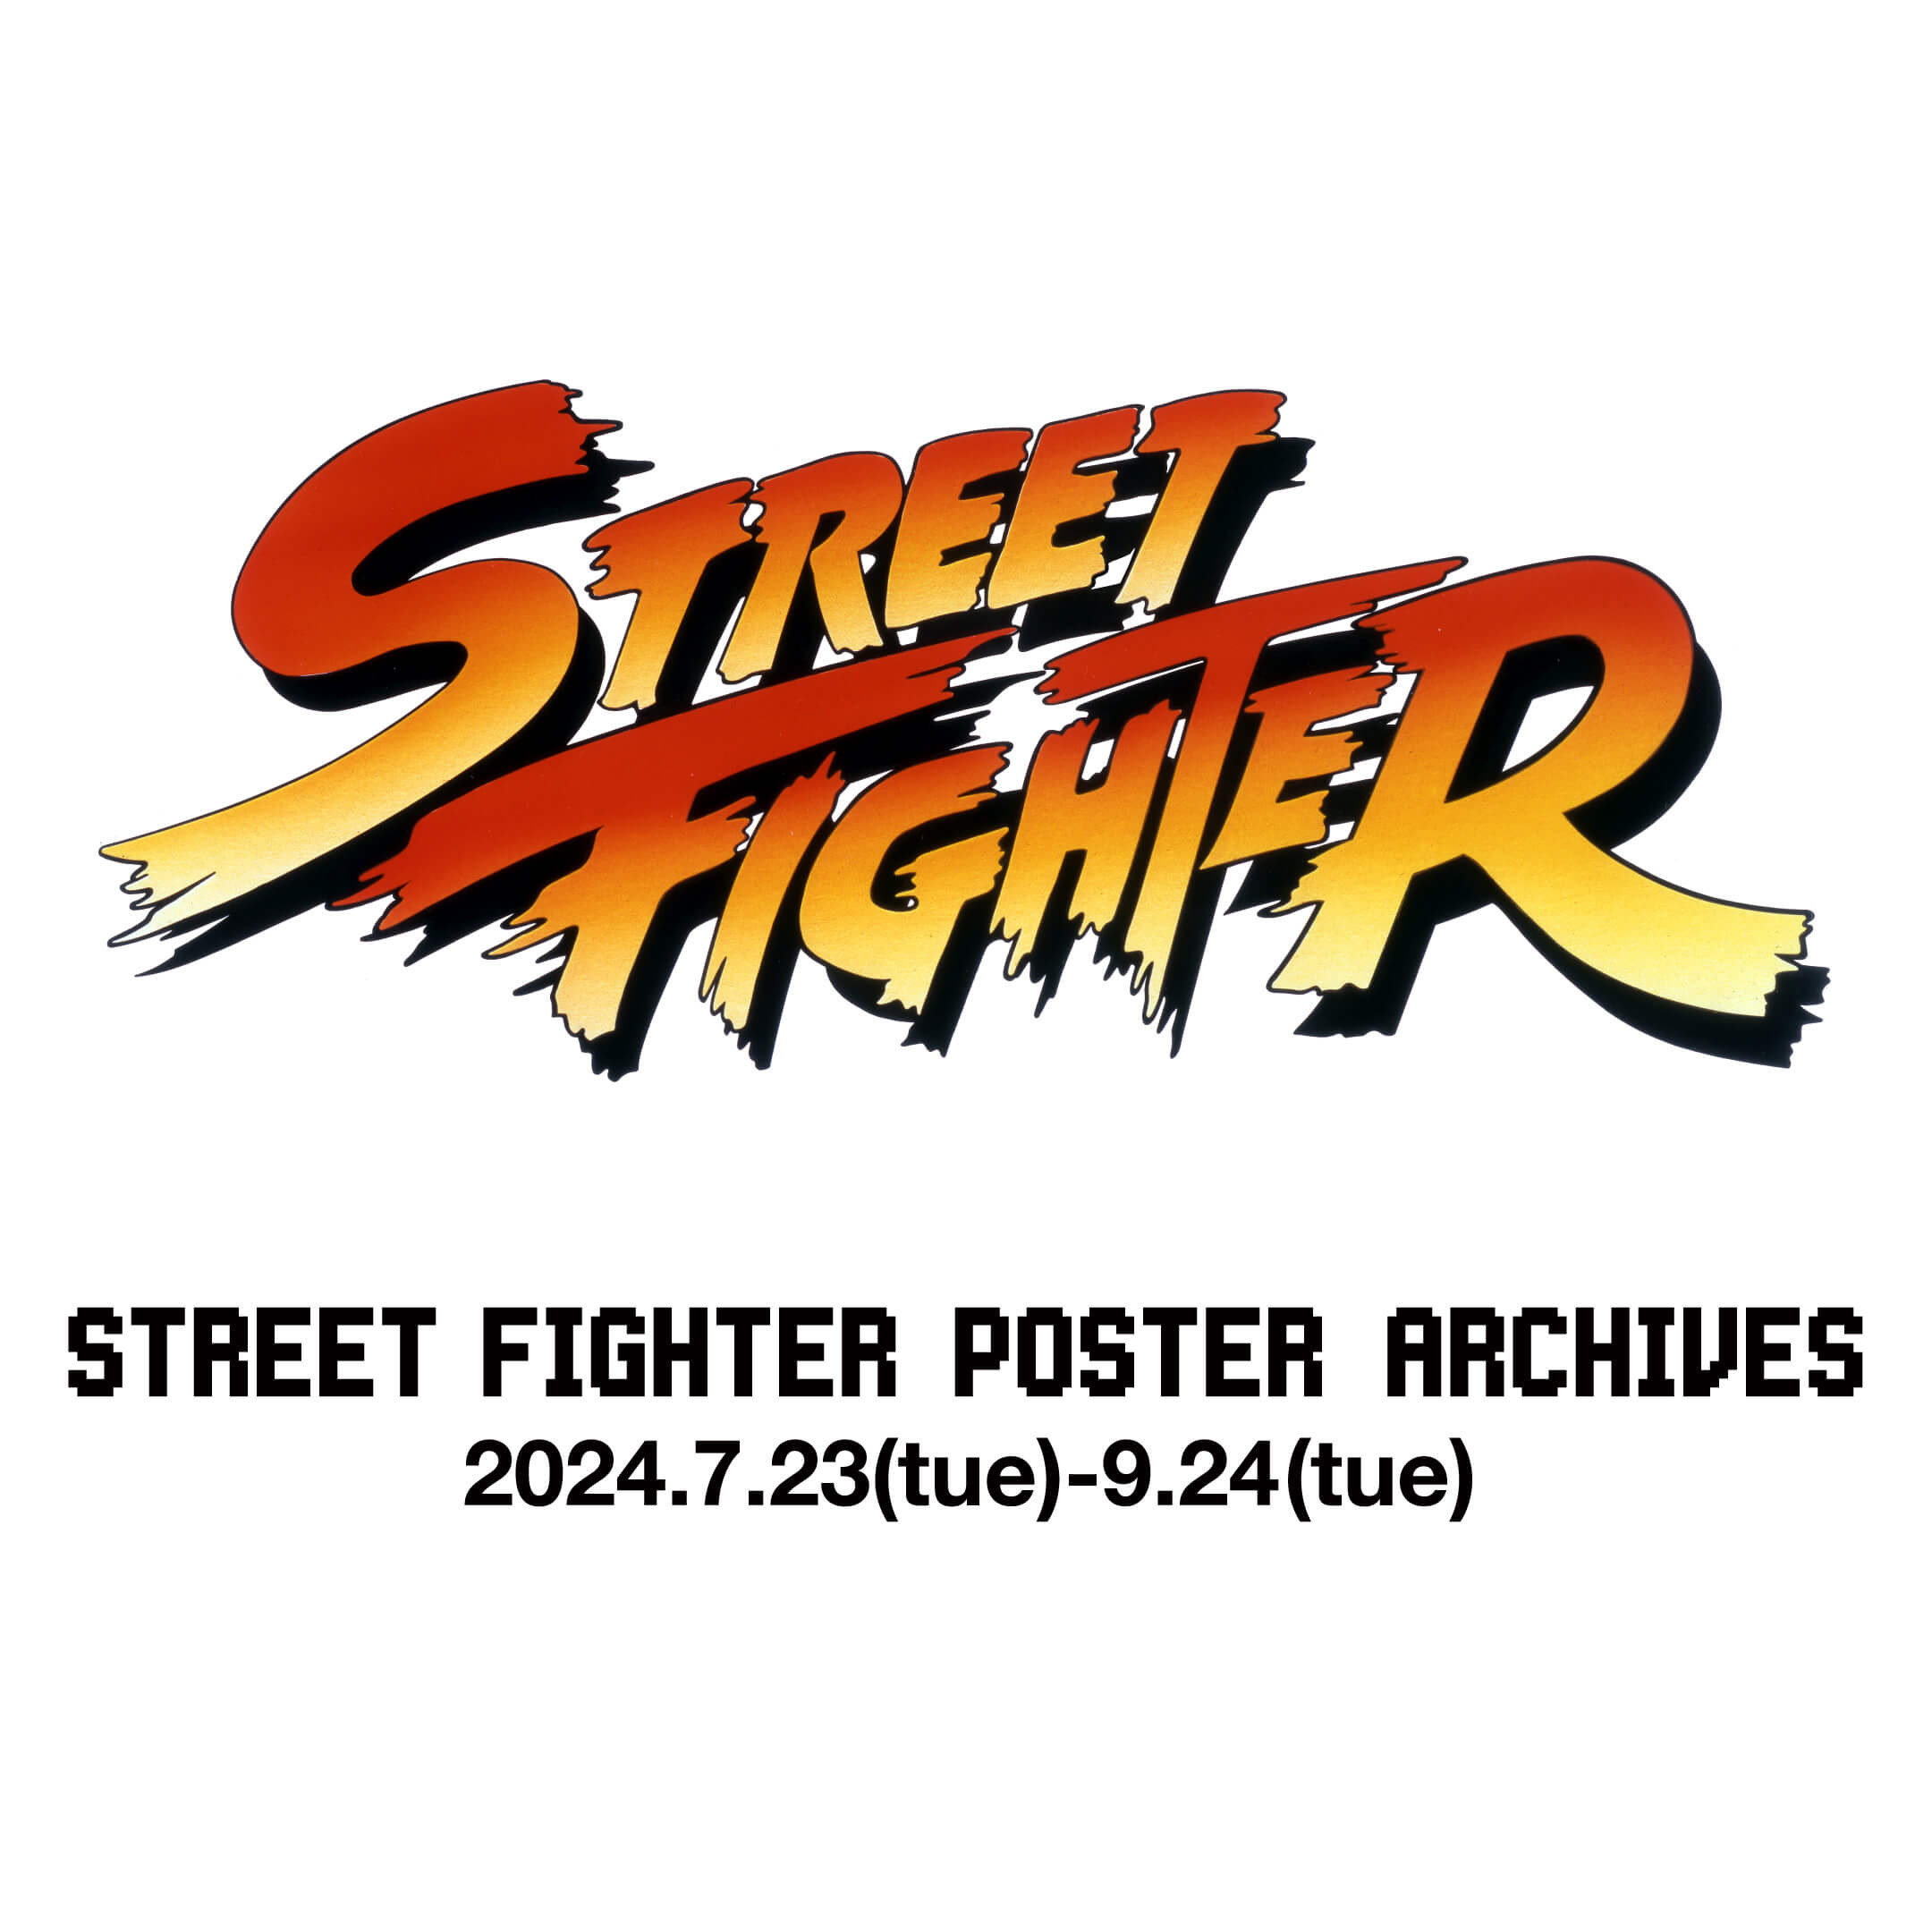 STREET FIGHTER POSTER ARCHIVES